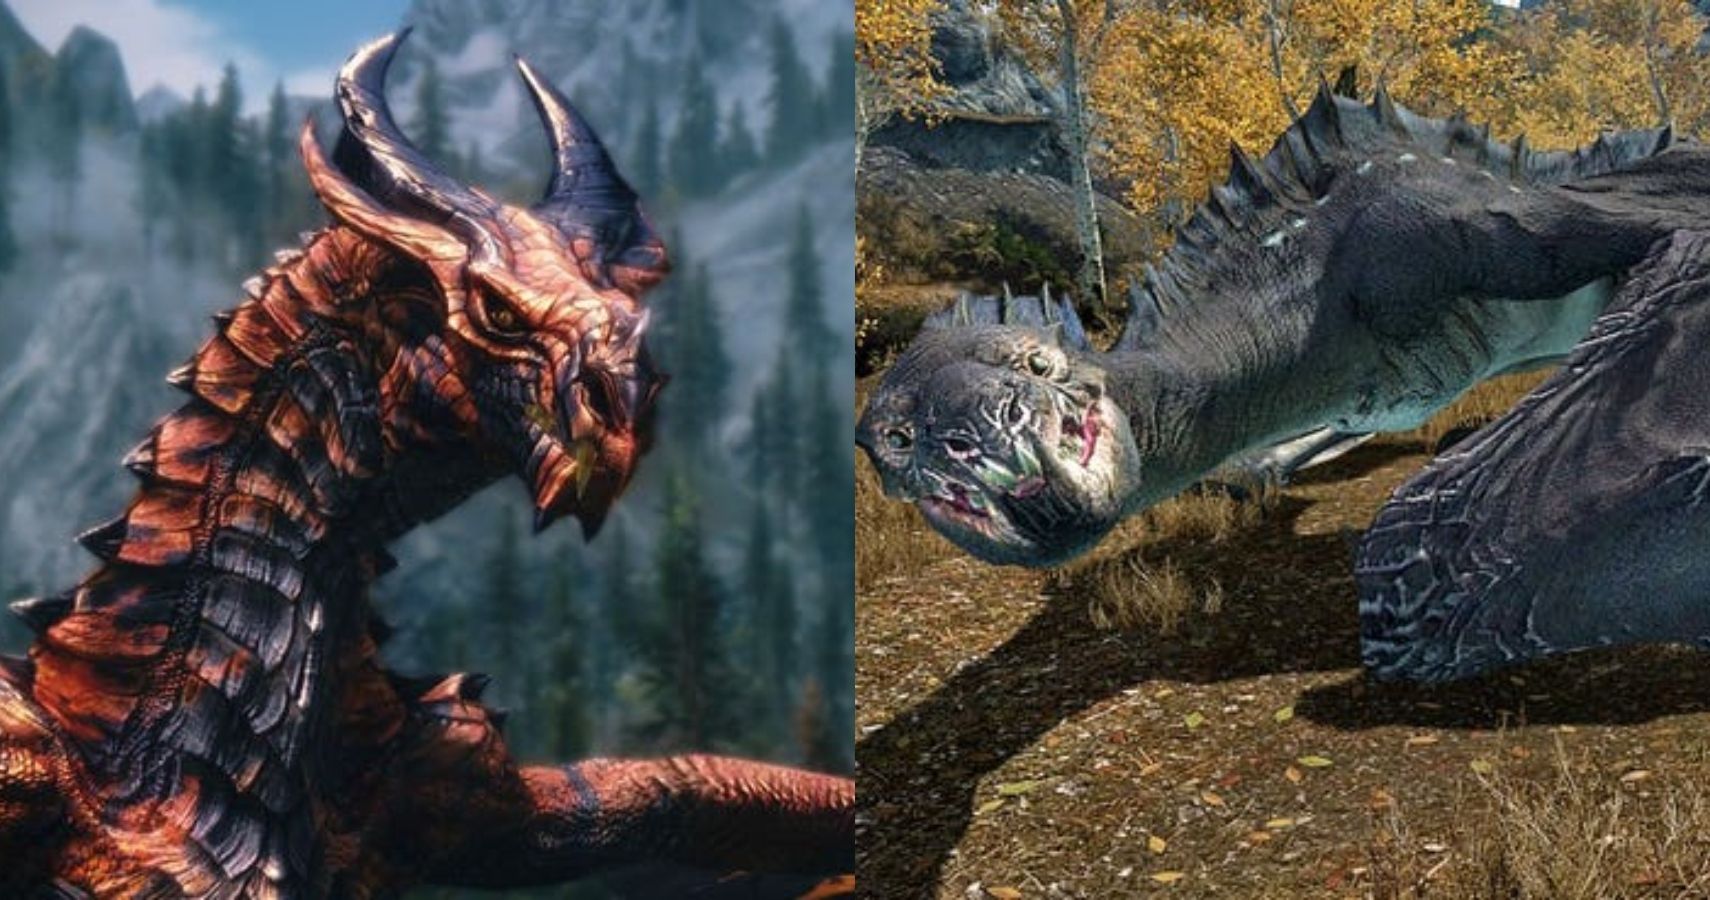 Tranquility Kostbar Tante Skyrim: Every Dragon From Weakest To Most Powerful, Ranked